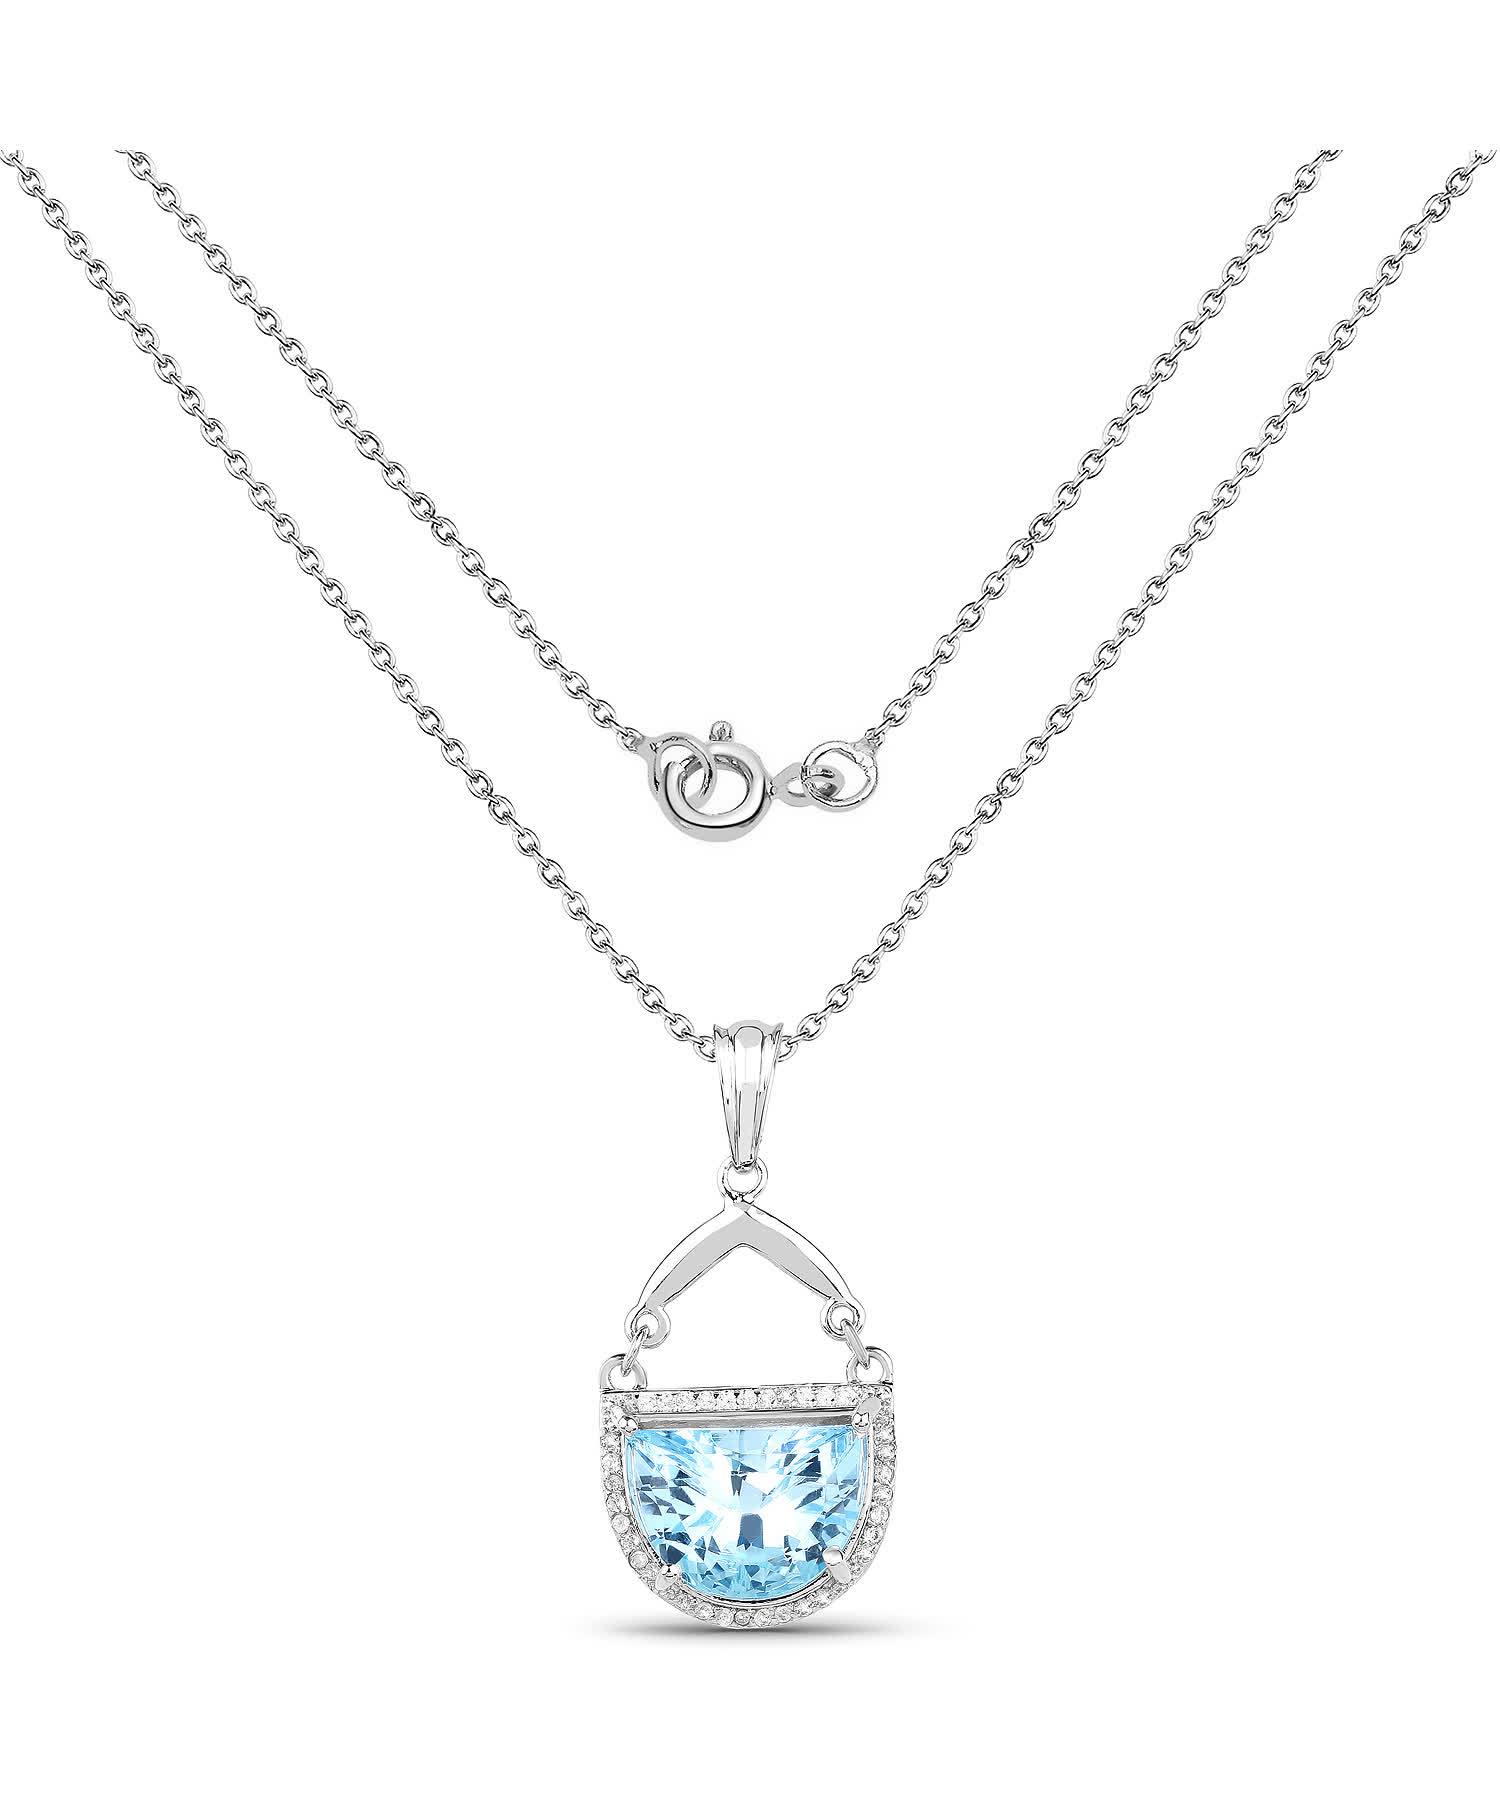 4.08ctw Natural Swiss Blue Topaz Rhodium Plated 925 Sterling Silver Pendant With Chain View 2